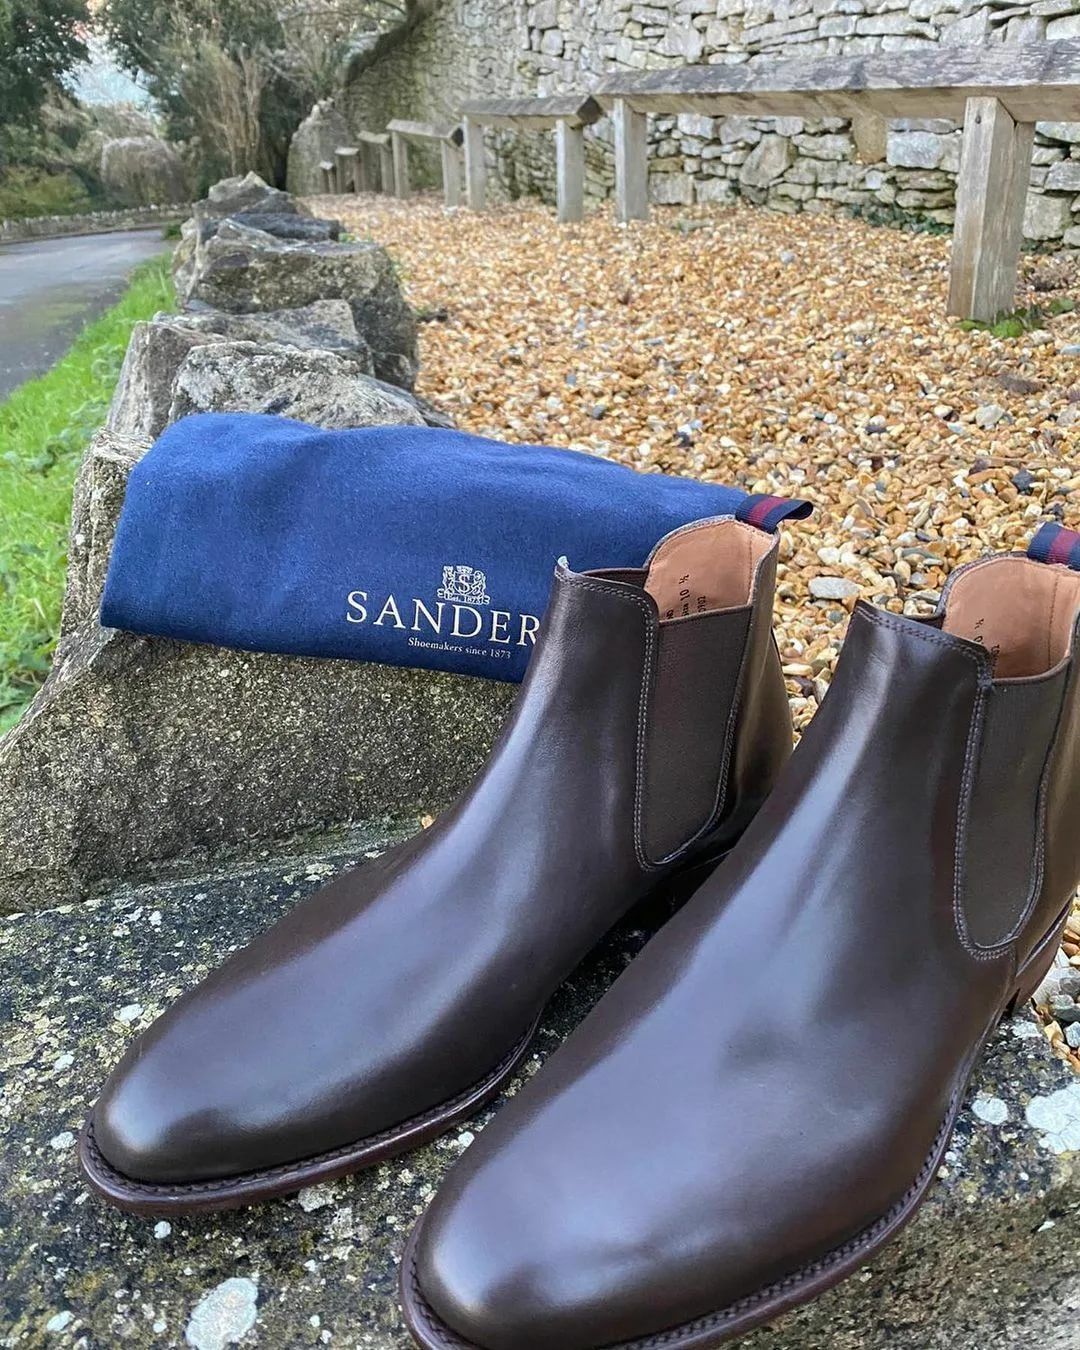 Sanders Bucharest Chelsea Boot at English Brands – New Arrival